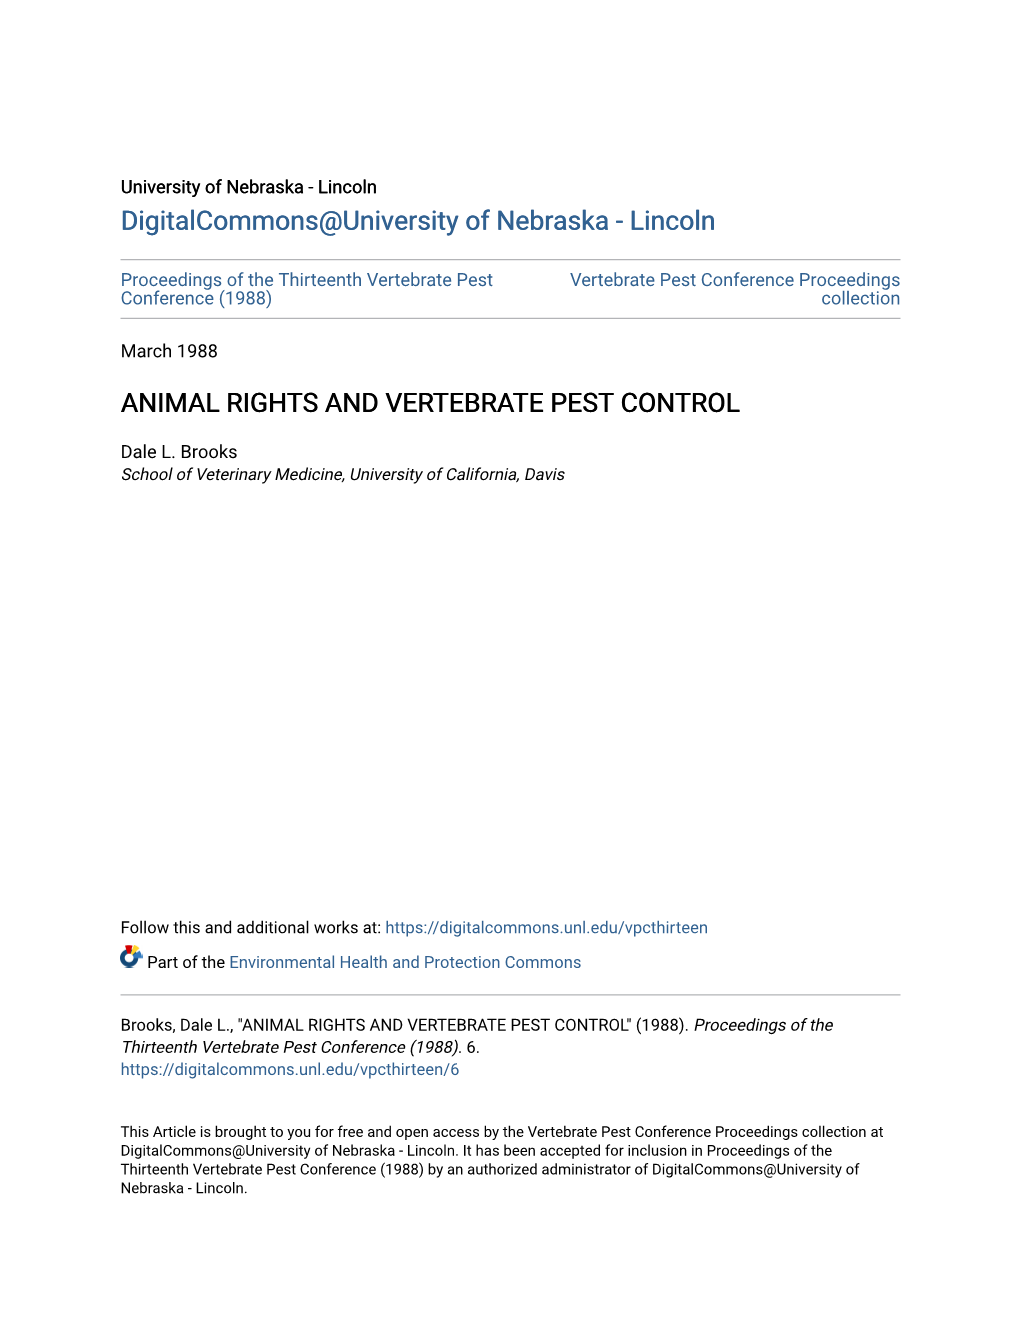 Animal Rights and Vertebrate Pest Control